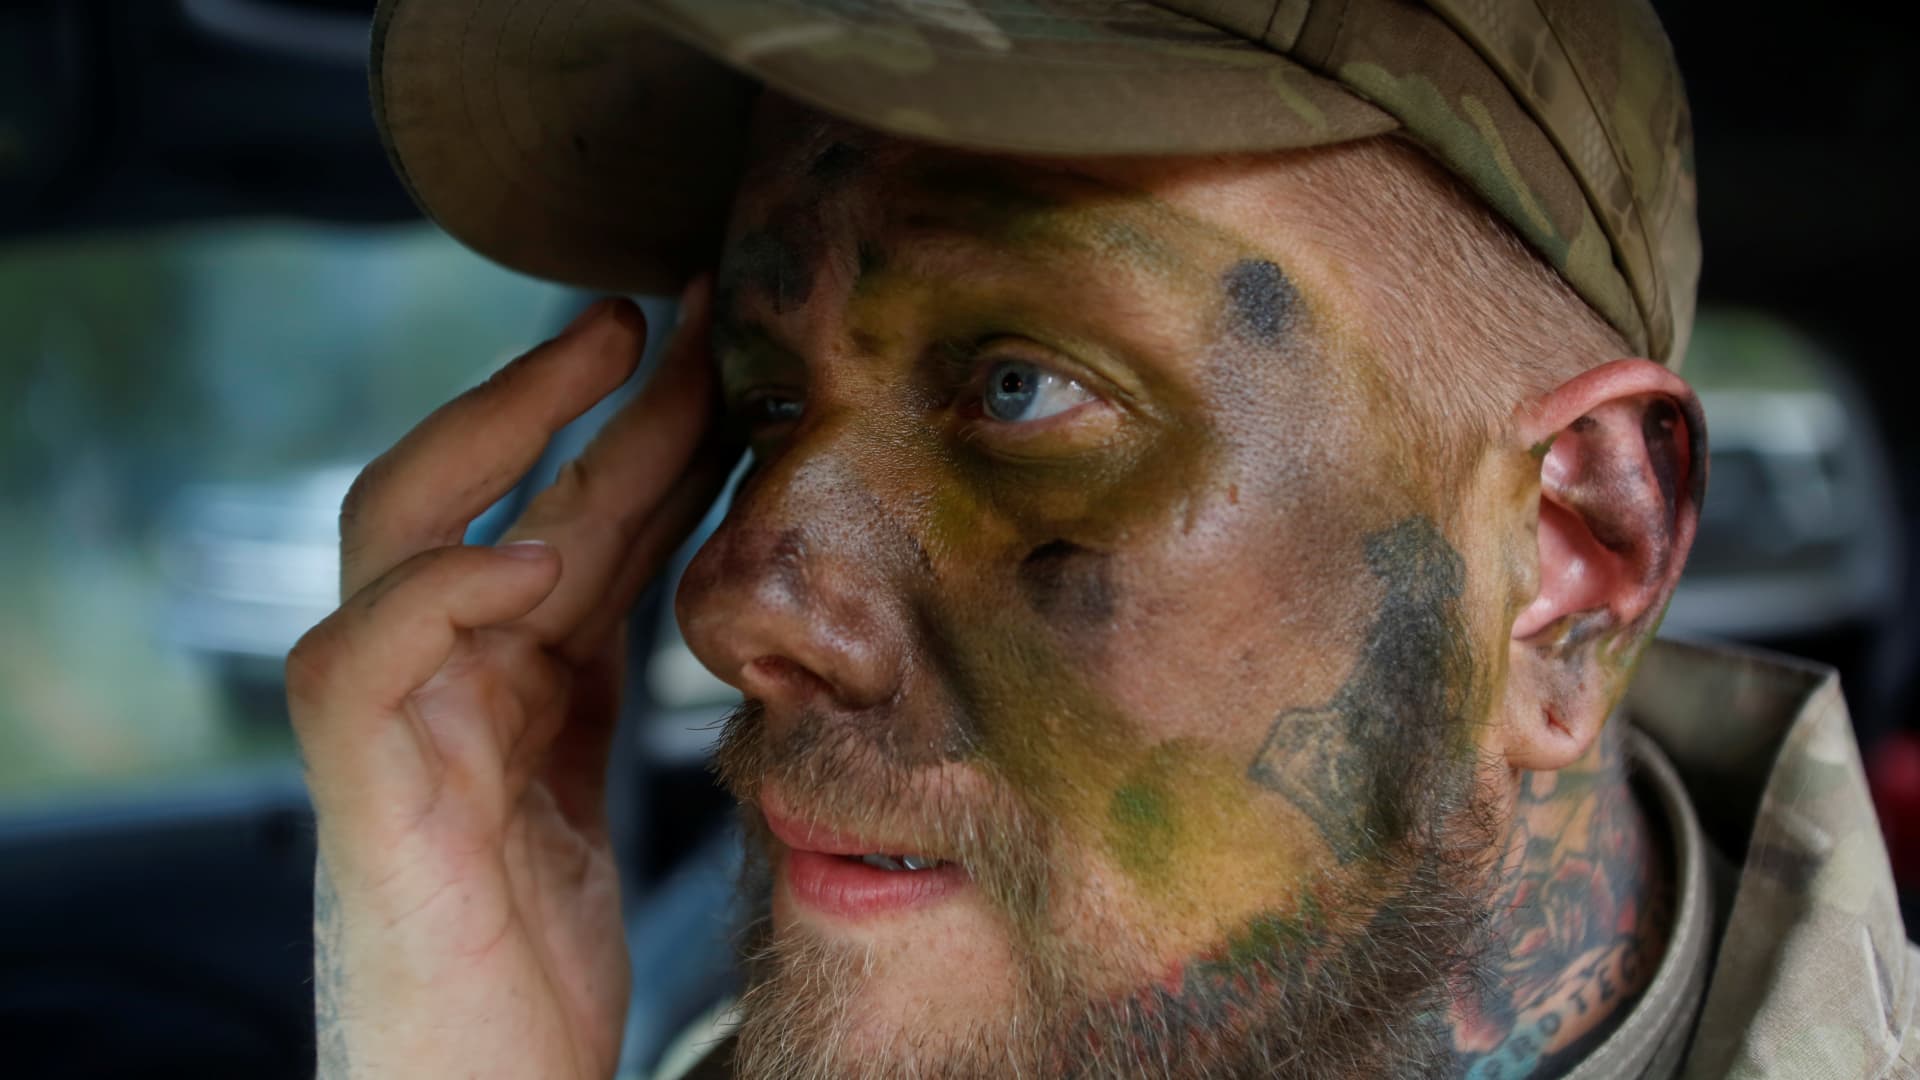 Jason Van Tatenhove, a member of the Oath Keepers, puts on camouflage face paint during a tactical training session in western Montana, U.S. April 30, 2016.